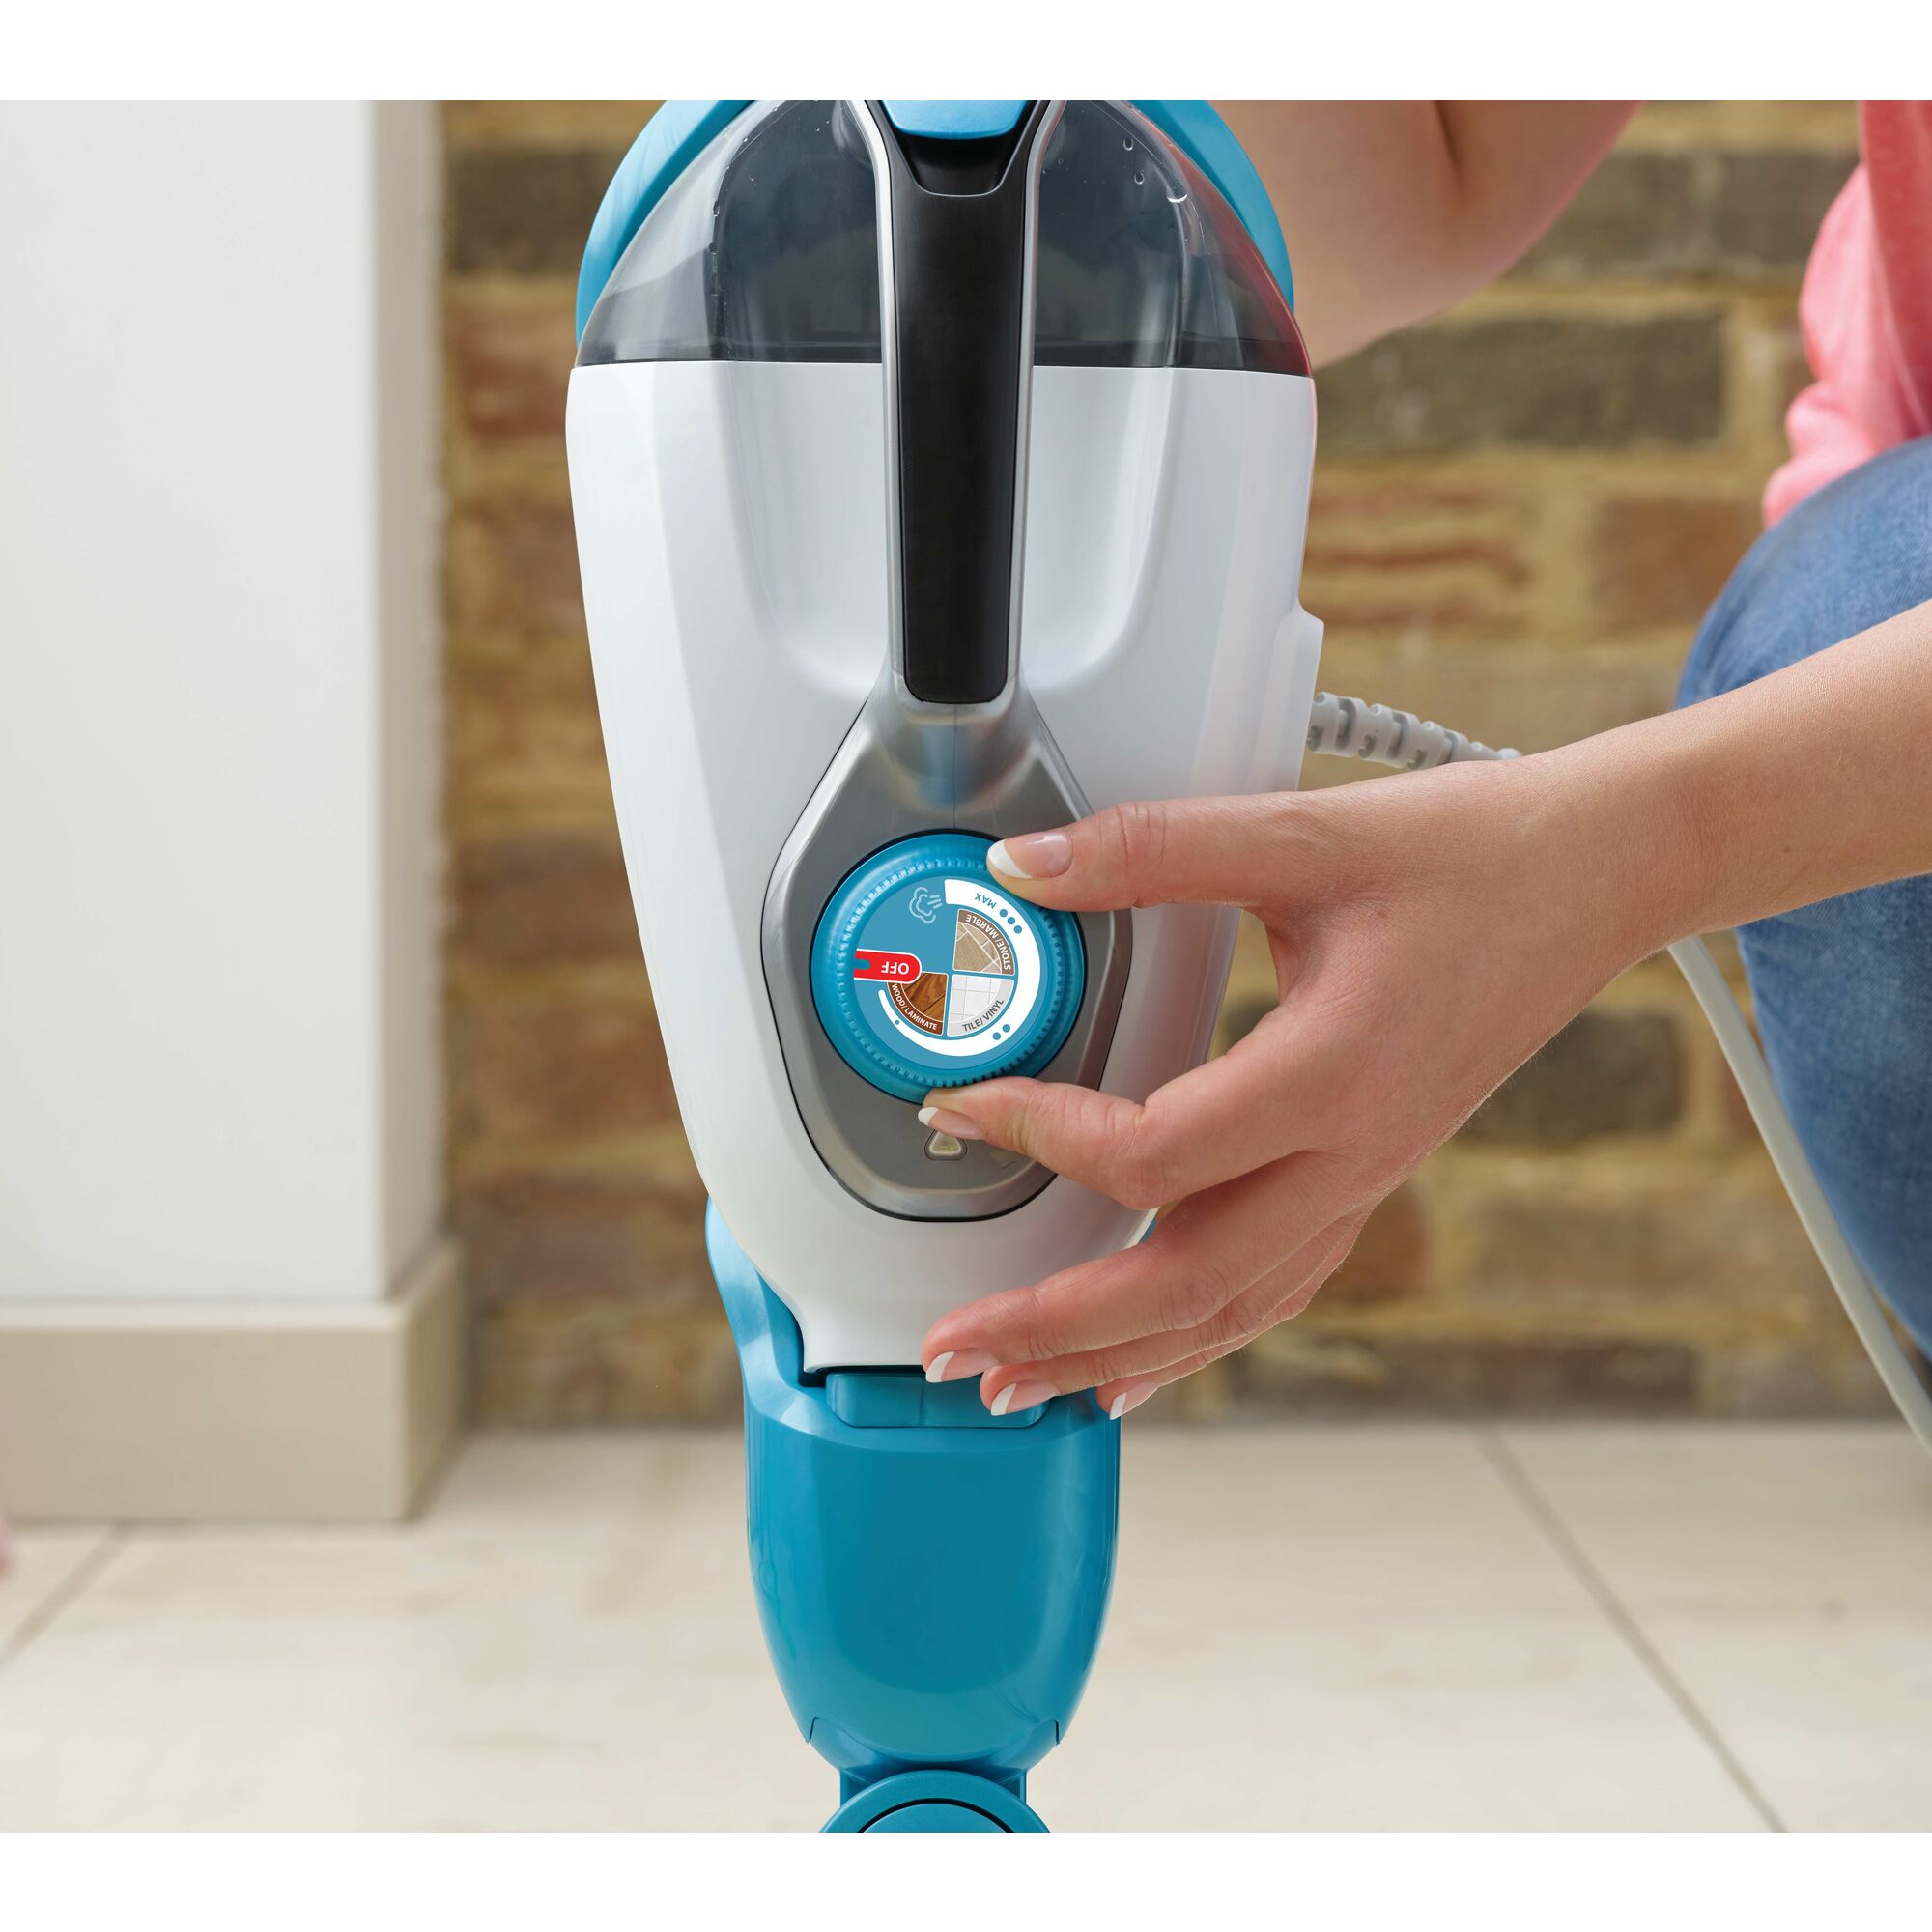 Adjustment knob to choose different modes in a 5 in 1 steam mop and portable steamer.